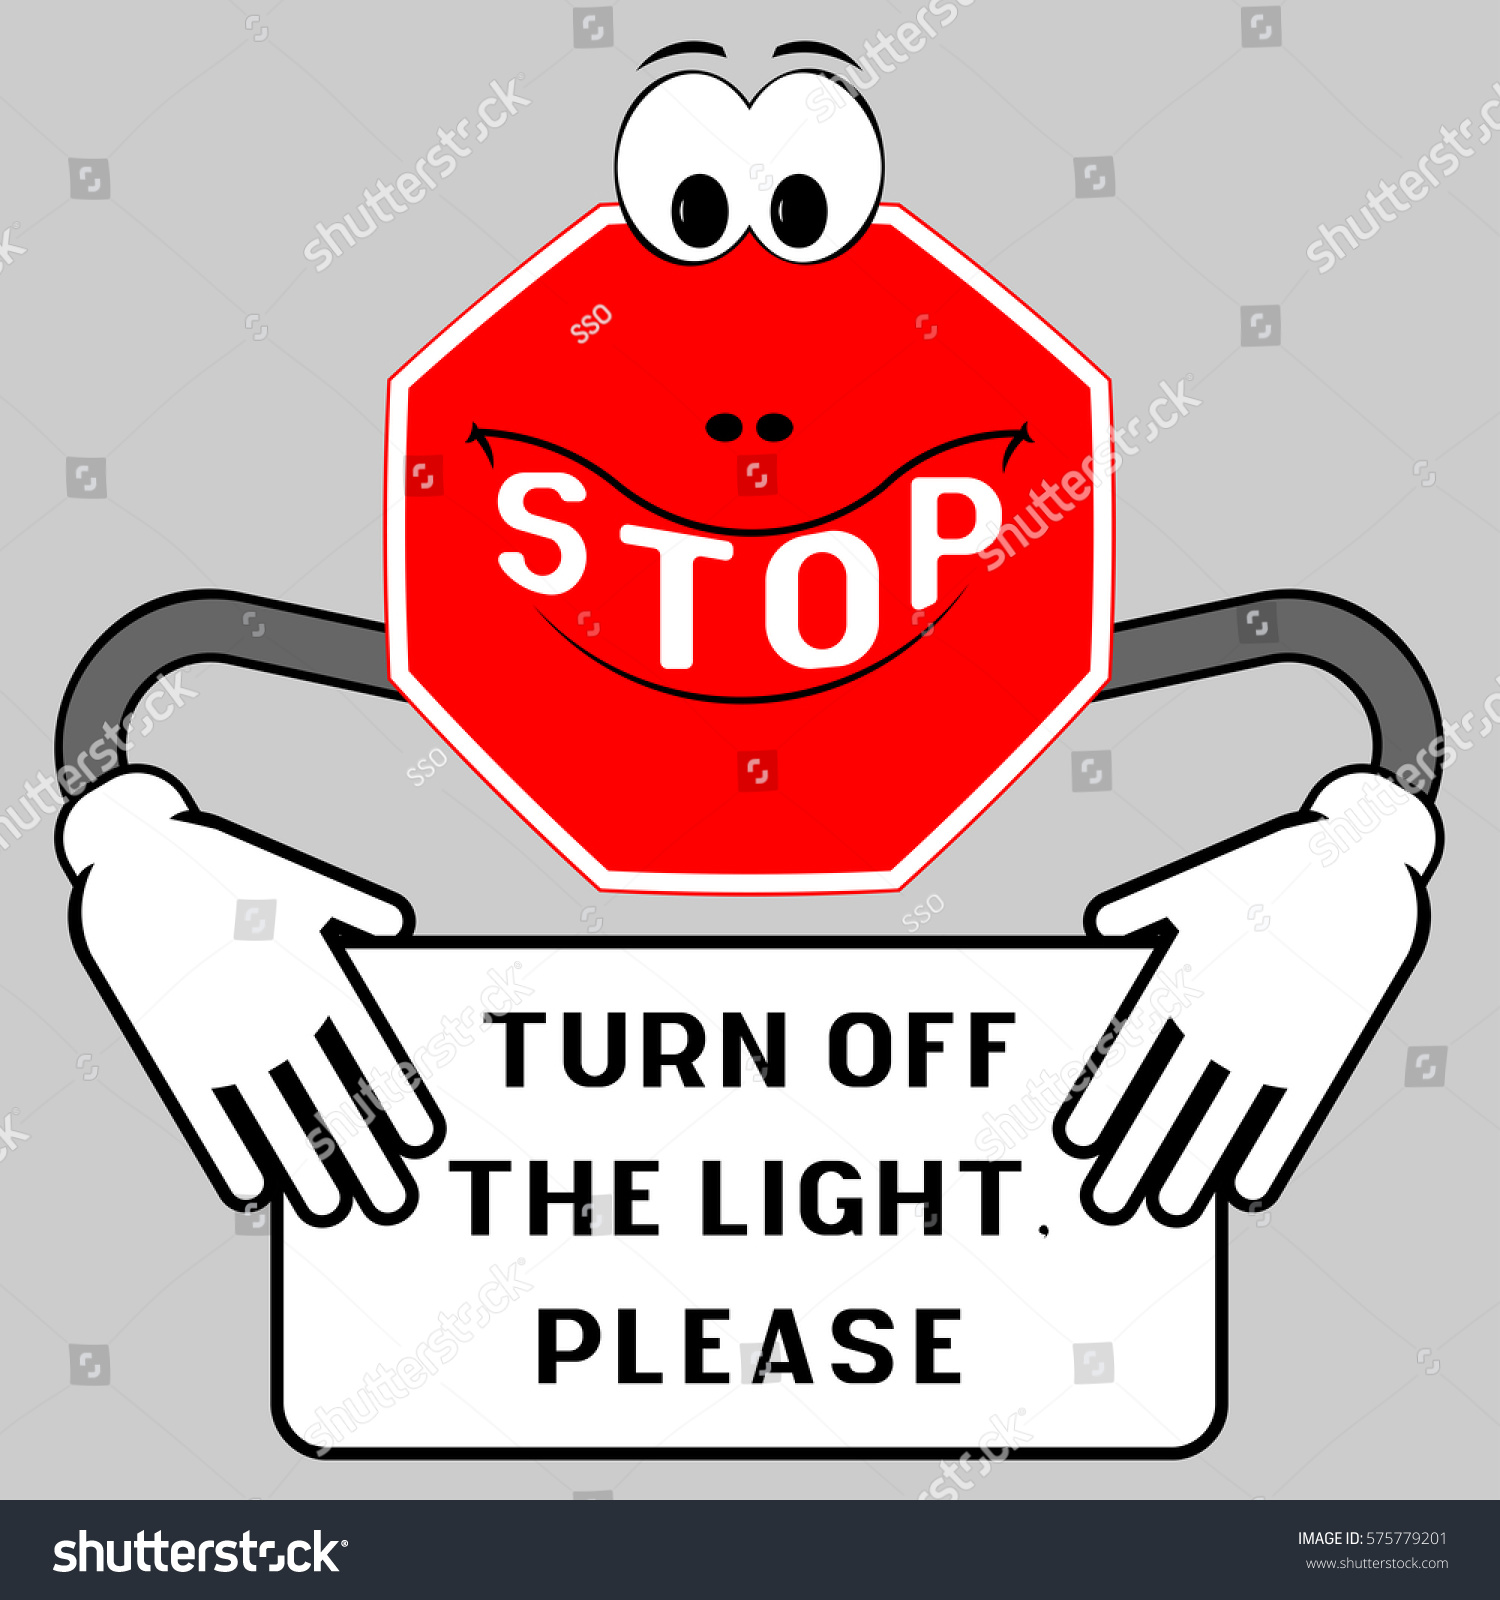 Turn off means. Please turn off the Light. Please turn off the Light icone.